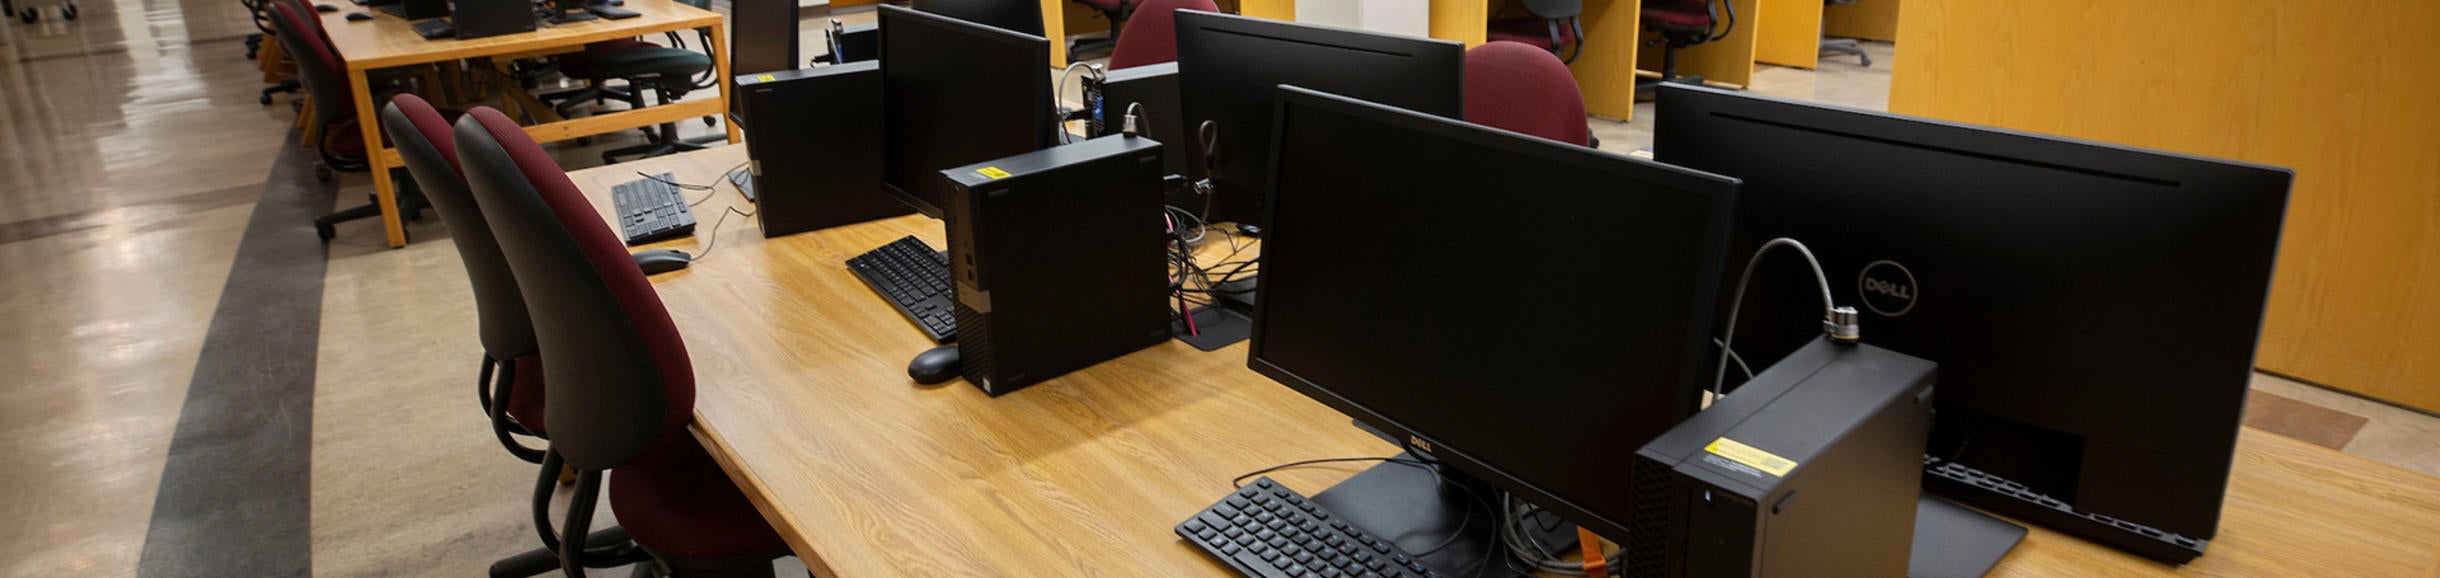 desktop computers on tables in library (c) UCR/Stan Lim